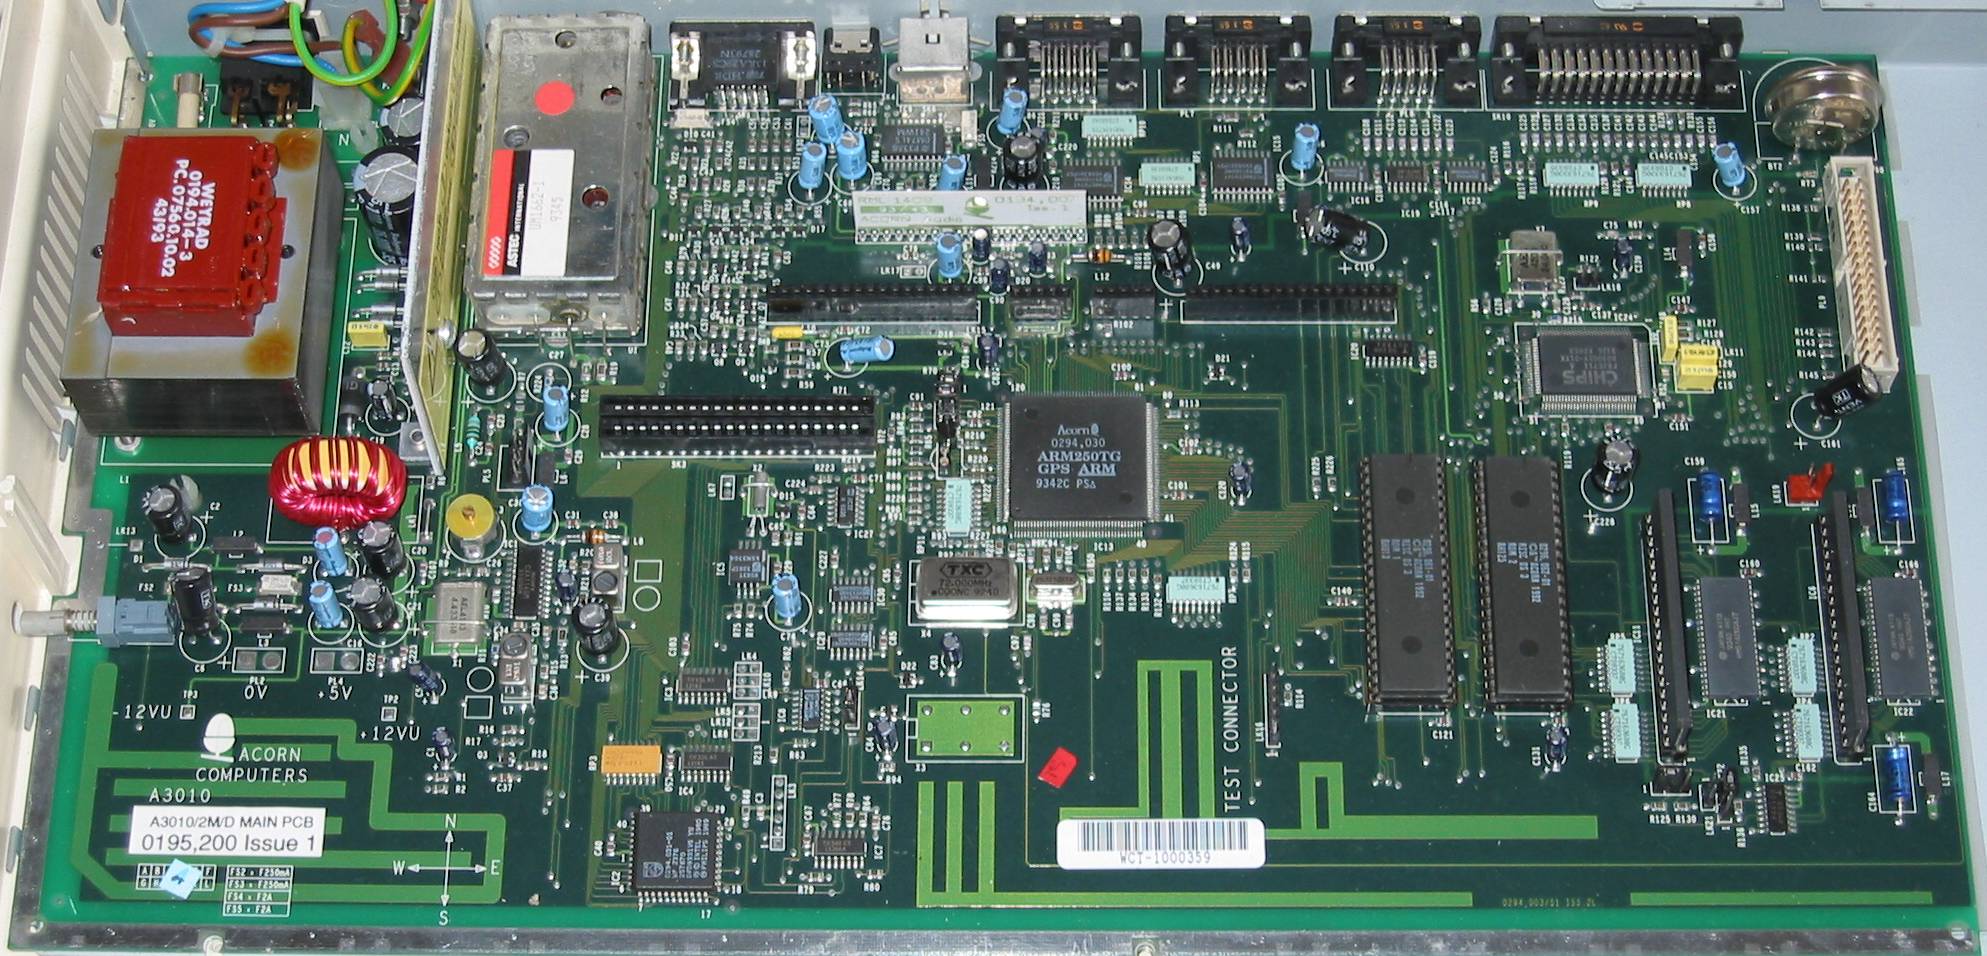 A3010 motherboard HiRes